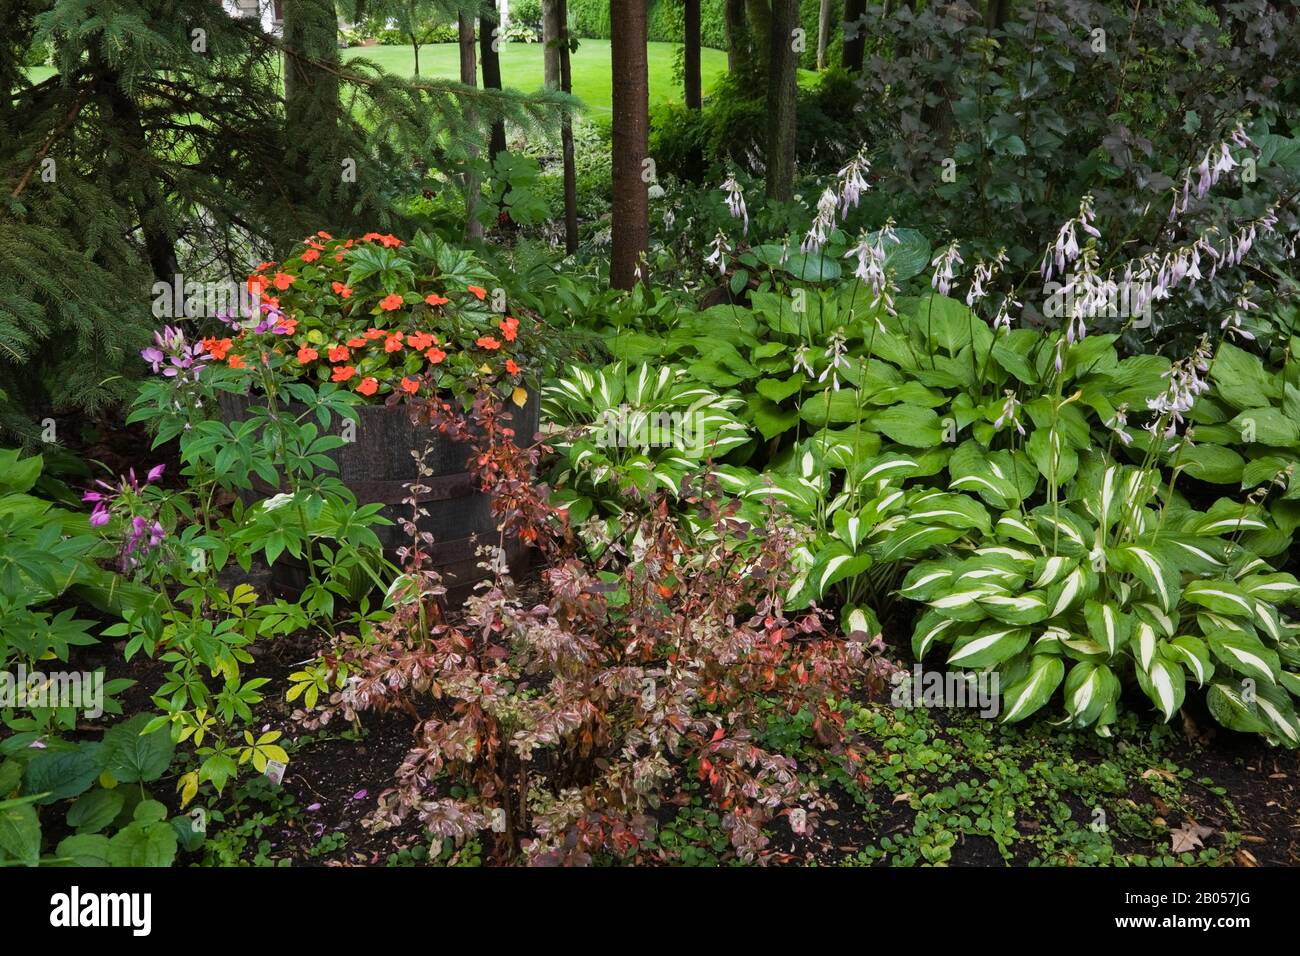 Old wooden barrel planter with red Impatiens bordered by evergreen tree, Hostas, Lysimachia nummularia 'Aurea' - Golden Creeping Jenny plants Stock Photo